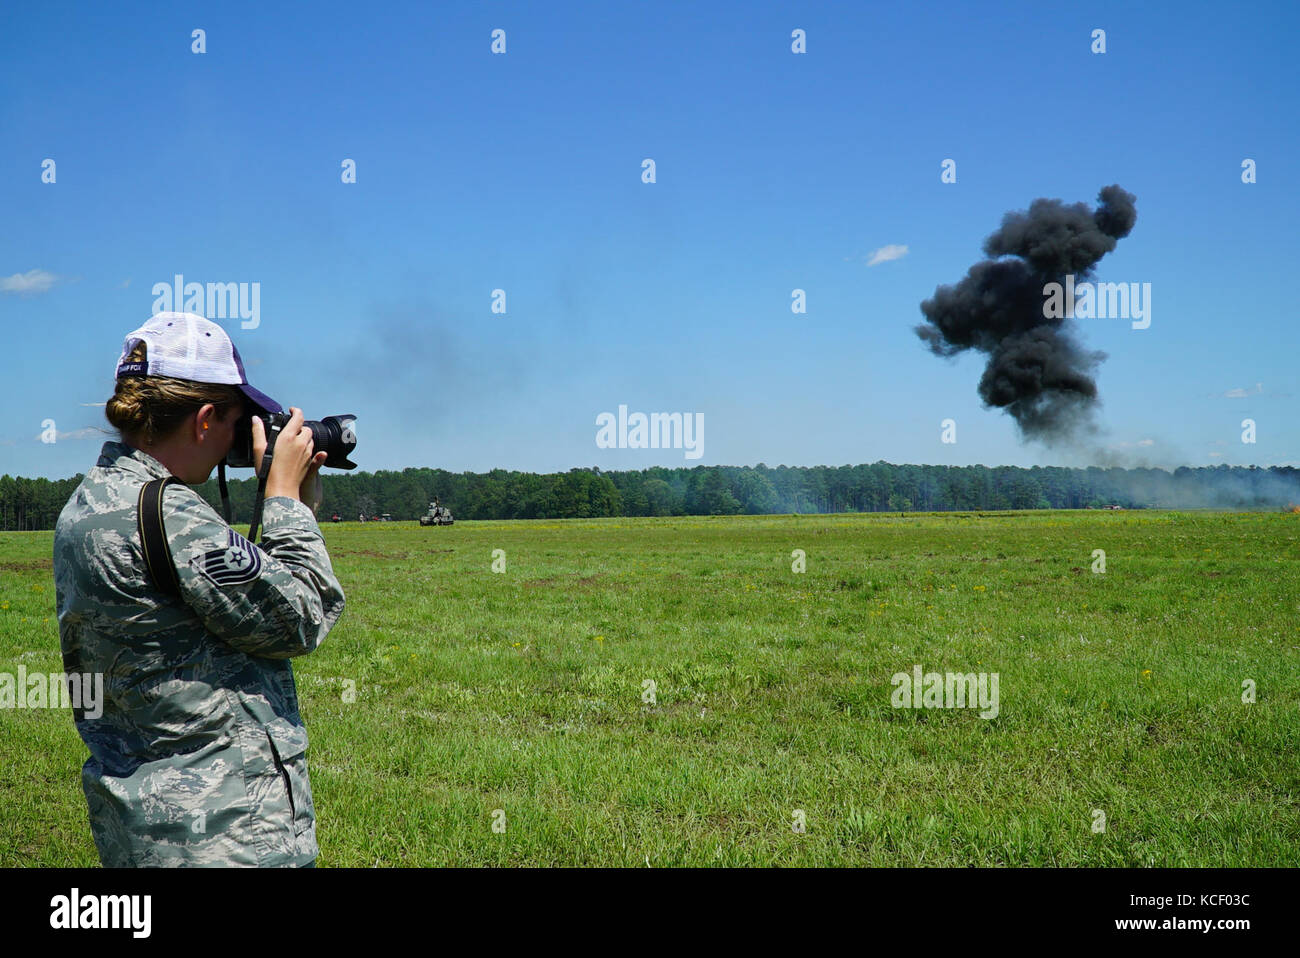 U.S. Air Force Tech Sgt. Nicole Szews from the 169th Fighter Wing Public Affairs Team captures images during the South Carolina National Guard Air and Ground Expo at McEntire Joint National Guard Base, South Carolina, May 6, 2017. This expo is a combined arms demonstration showcasing the abilities of South Carolina National Guard Airmen and Soldiers while saying thank you for the support of fellow South Carolinians and the surrounding community. (U.S. Army National Guard photo by Capt. Brian Hare) Stock Photo